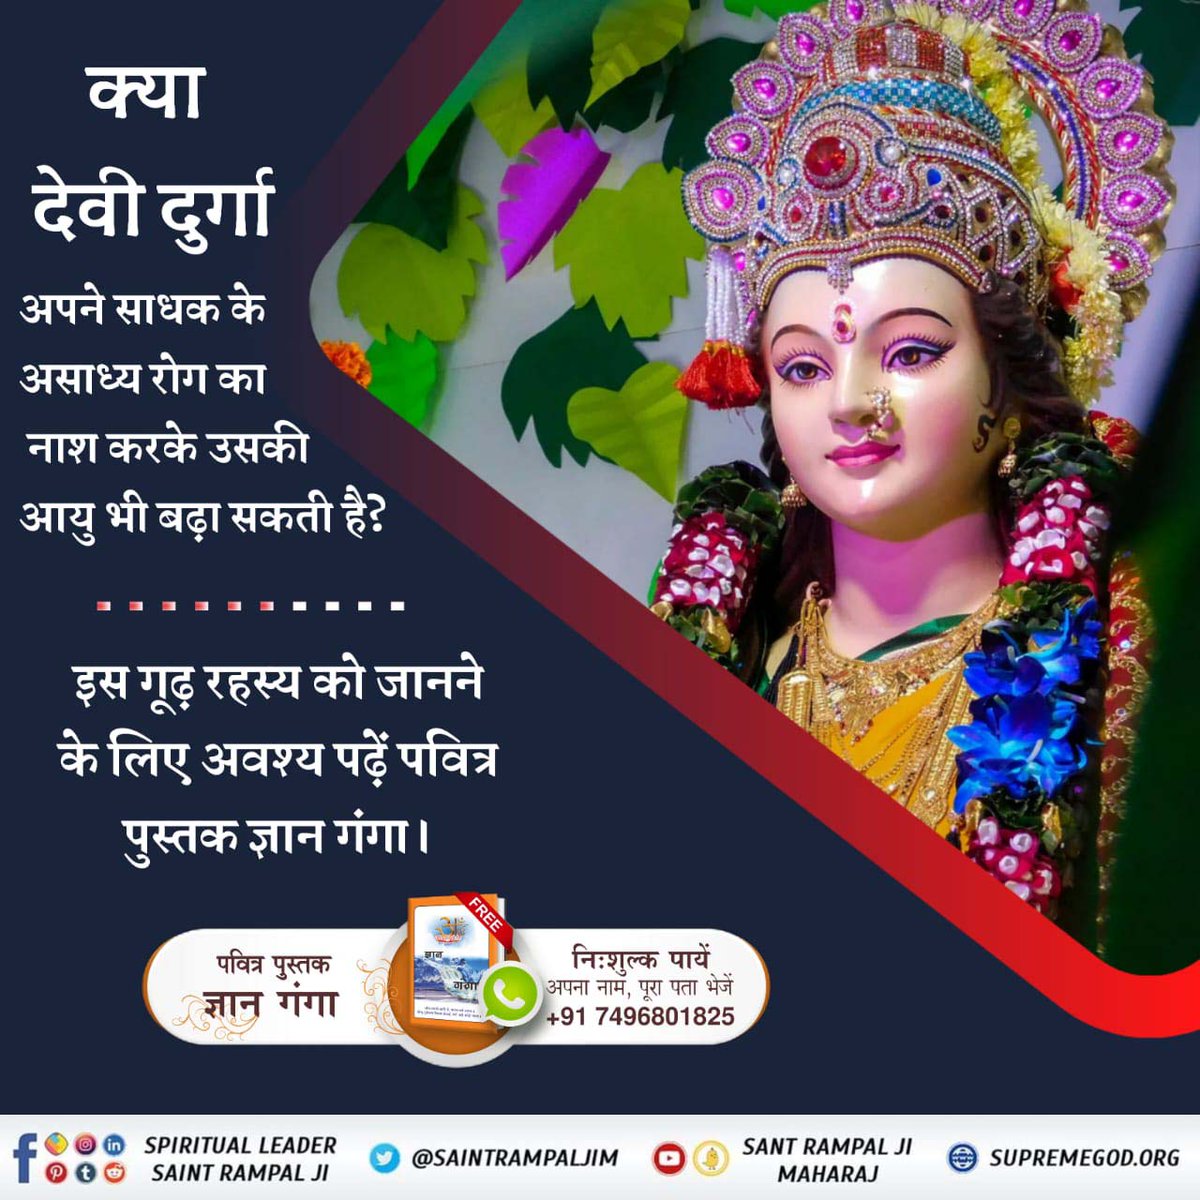 #भूखेबच्चेदेख_मां_कैसे_खुश_हो It is evident that even Shri Durga is not the Supreme God mentioned in the Holy Books of Hinduism. She also takes birth and dies. That’s why this Kaal Brahm says in Holy Gita 15:17 and 2:17 that the Supreme God alone is known as the Eternal God.